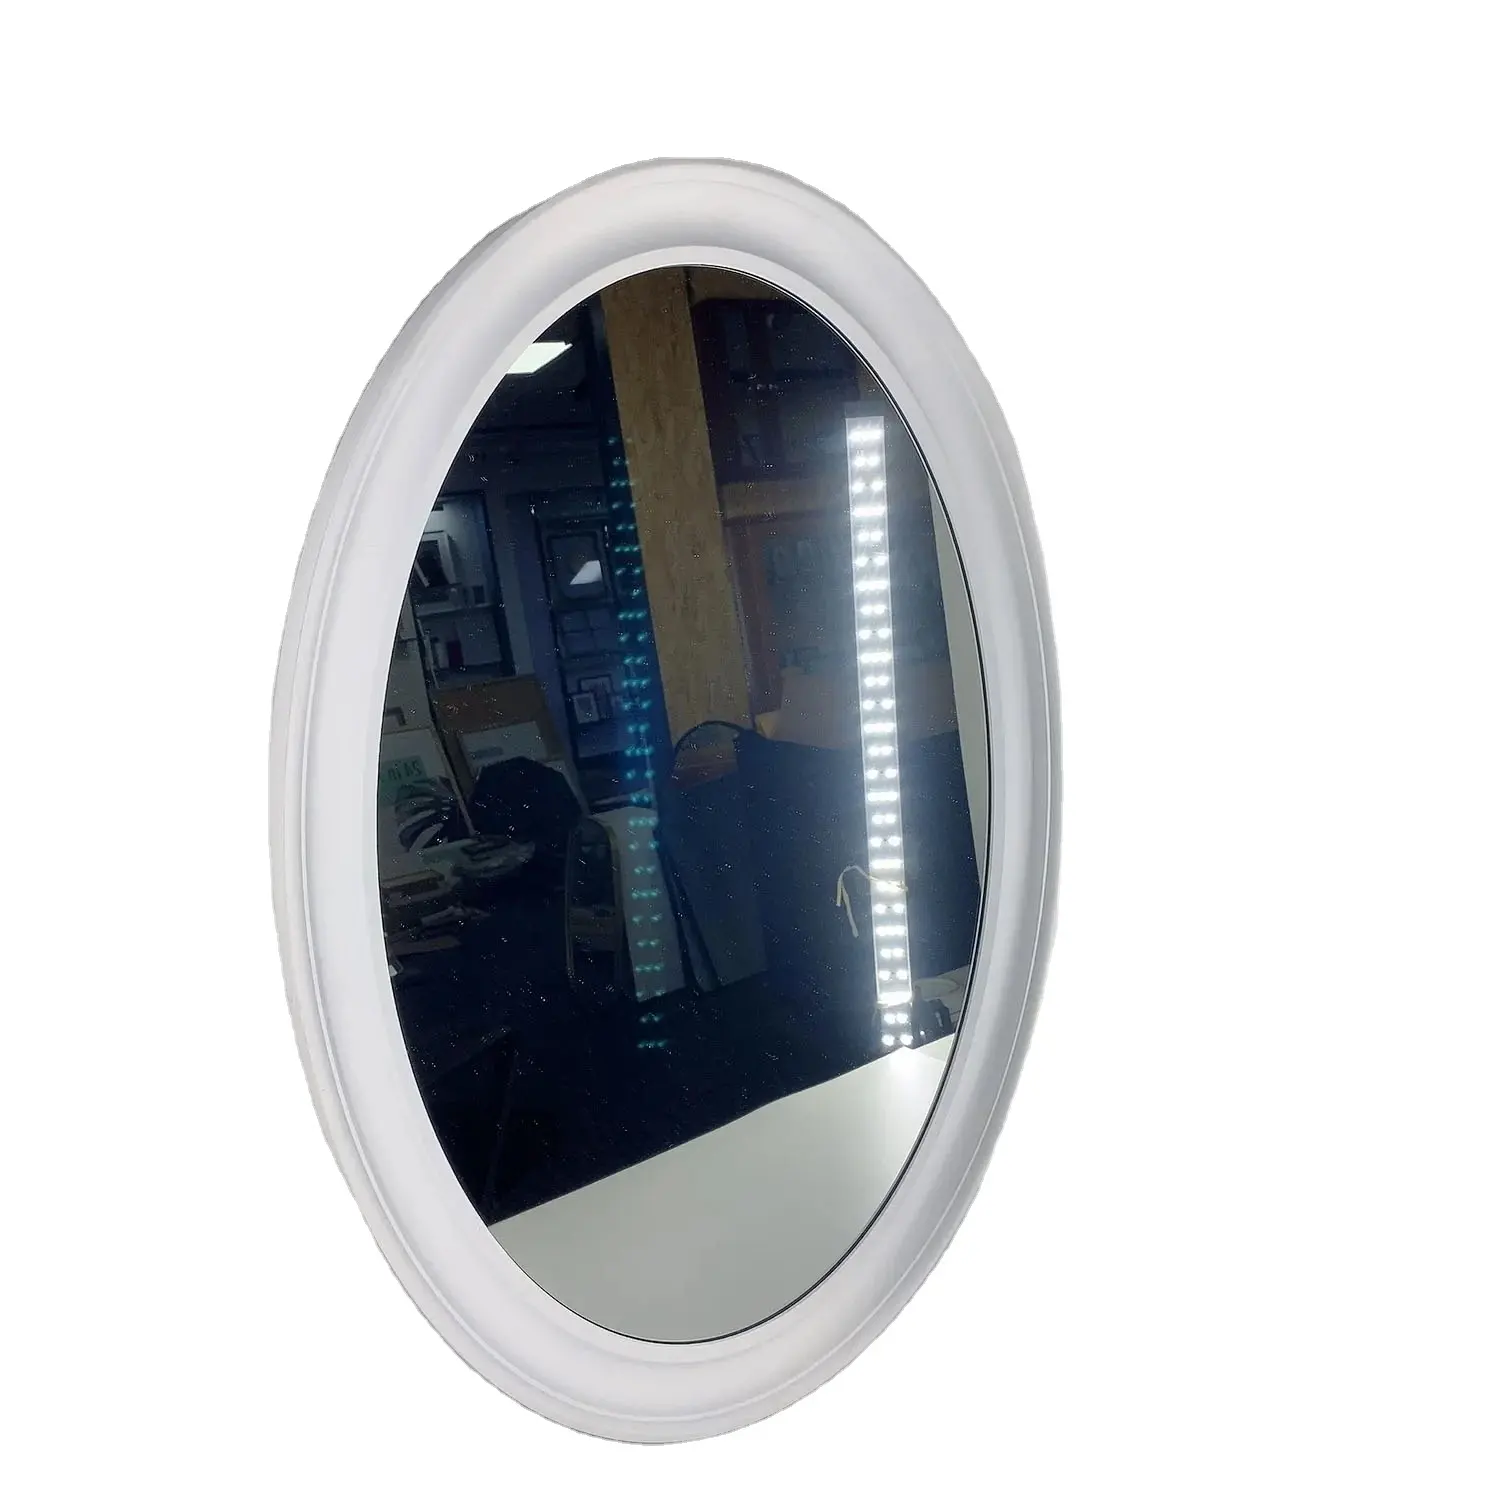 White 31inch Oval Shaped Wall Mirror Bevel Hanging Plastic Framed Vanity Mirrors For Home Decor Living Room Bathroom Bedroom